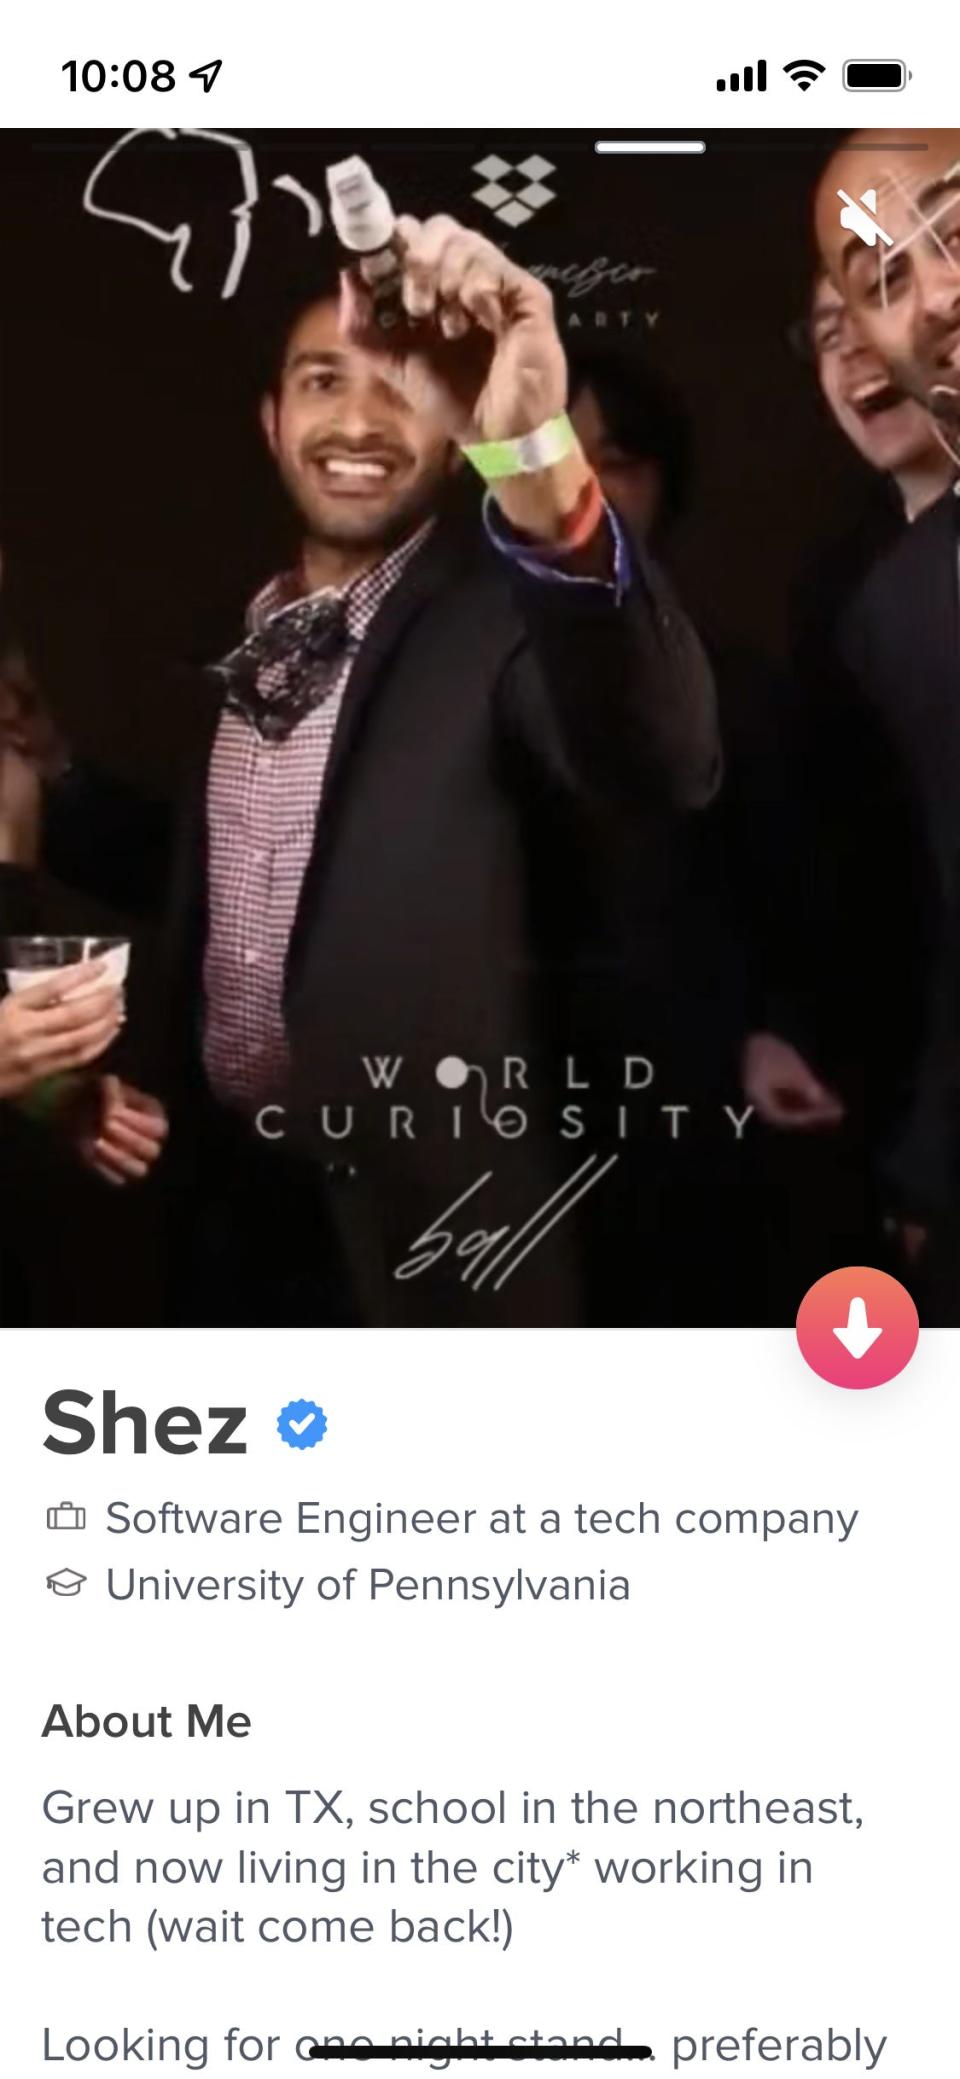 Shez shared his Tinder profile with dating expert Sara Tick, who gave him suggestions for updating it.